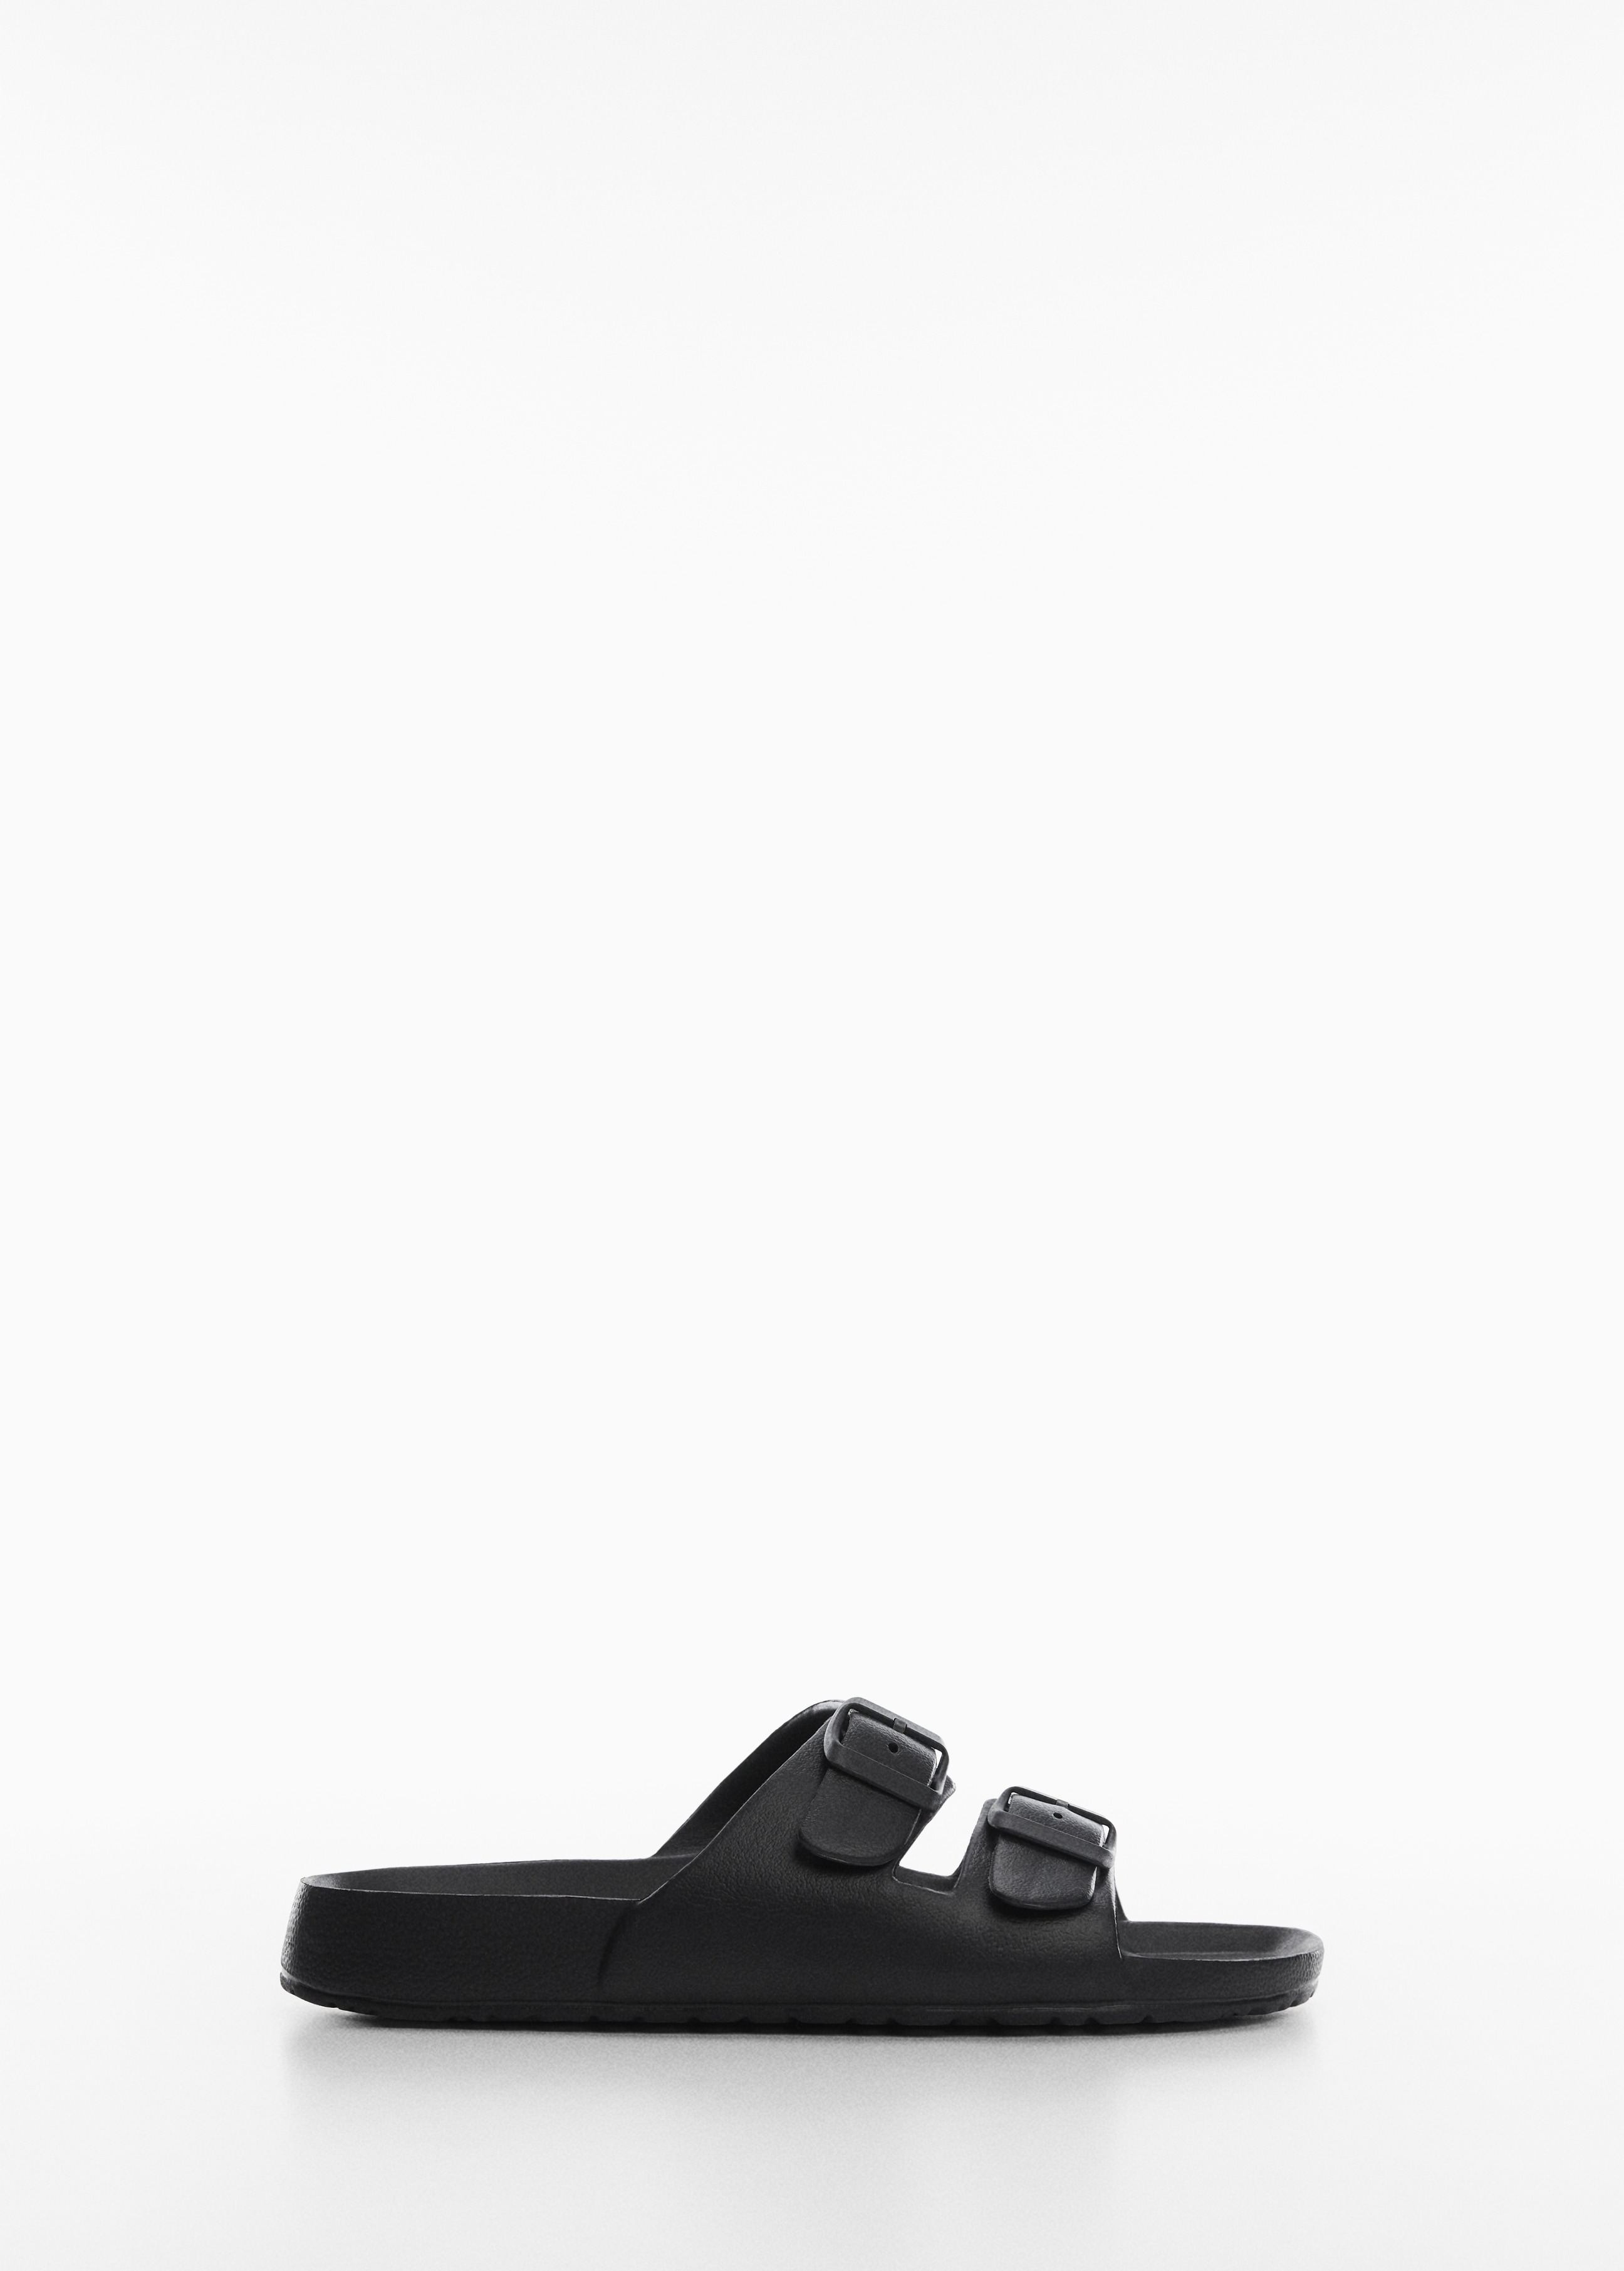 Rubber sandal with buckle - Article without model